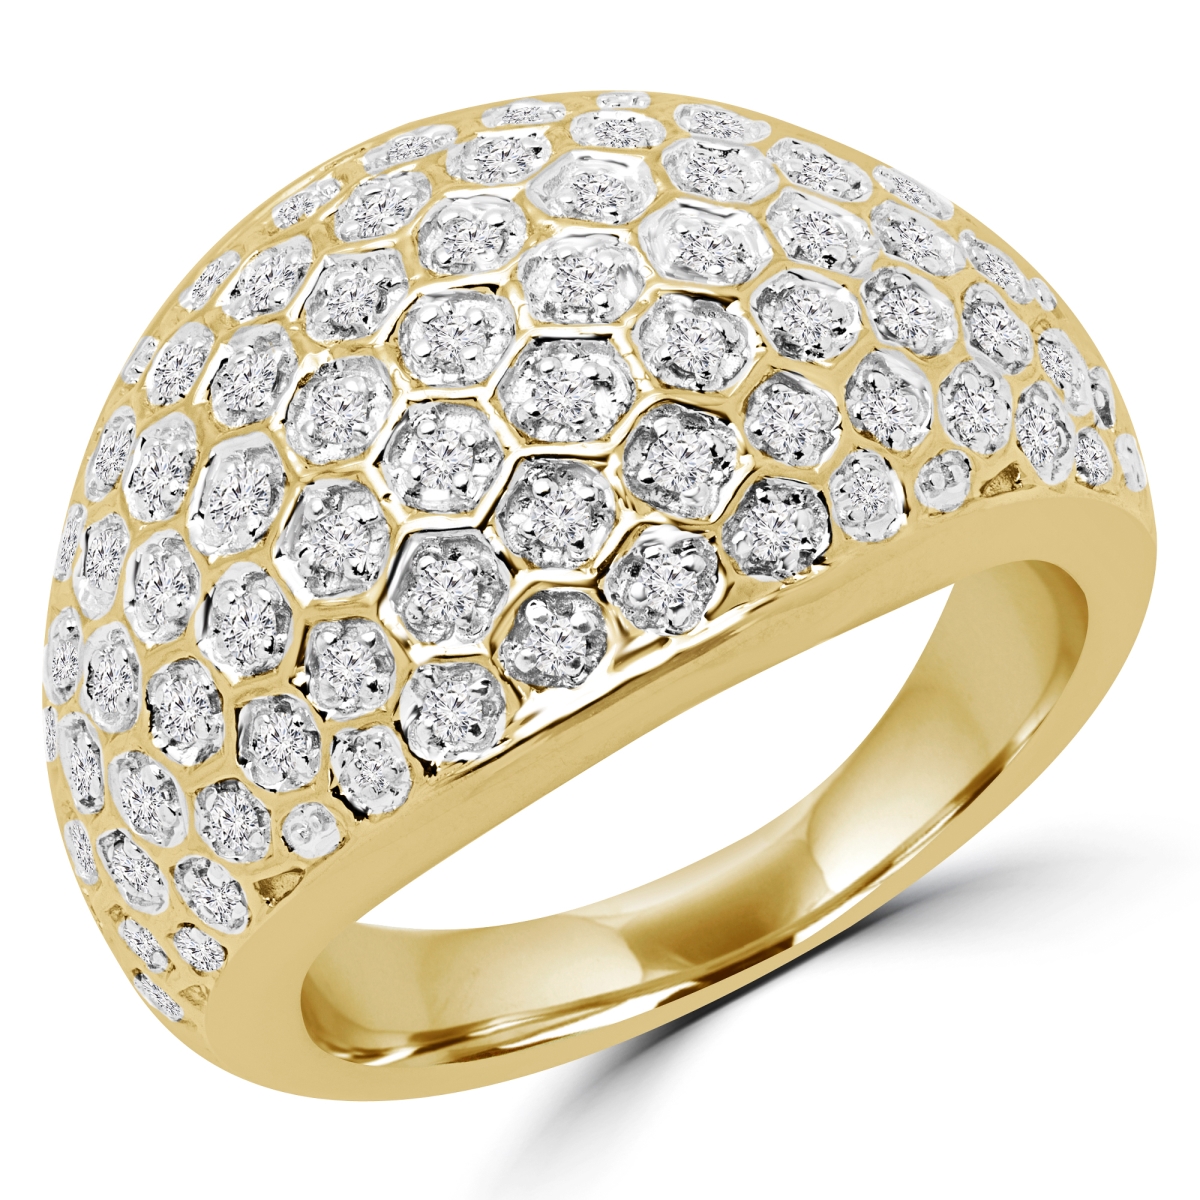 Picture of Majesty Diamonds MDR170046-3.25 0.5 CTW Round Diamond Pave Cocktail Ring in 14K Yellow Gold - 3.25